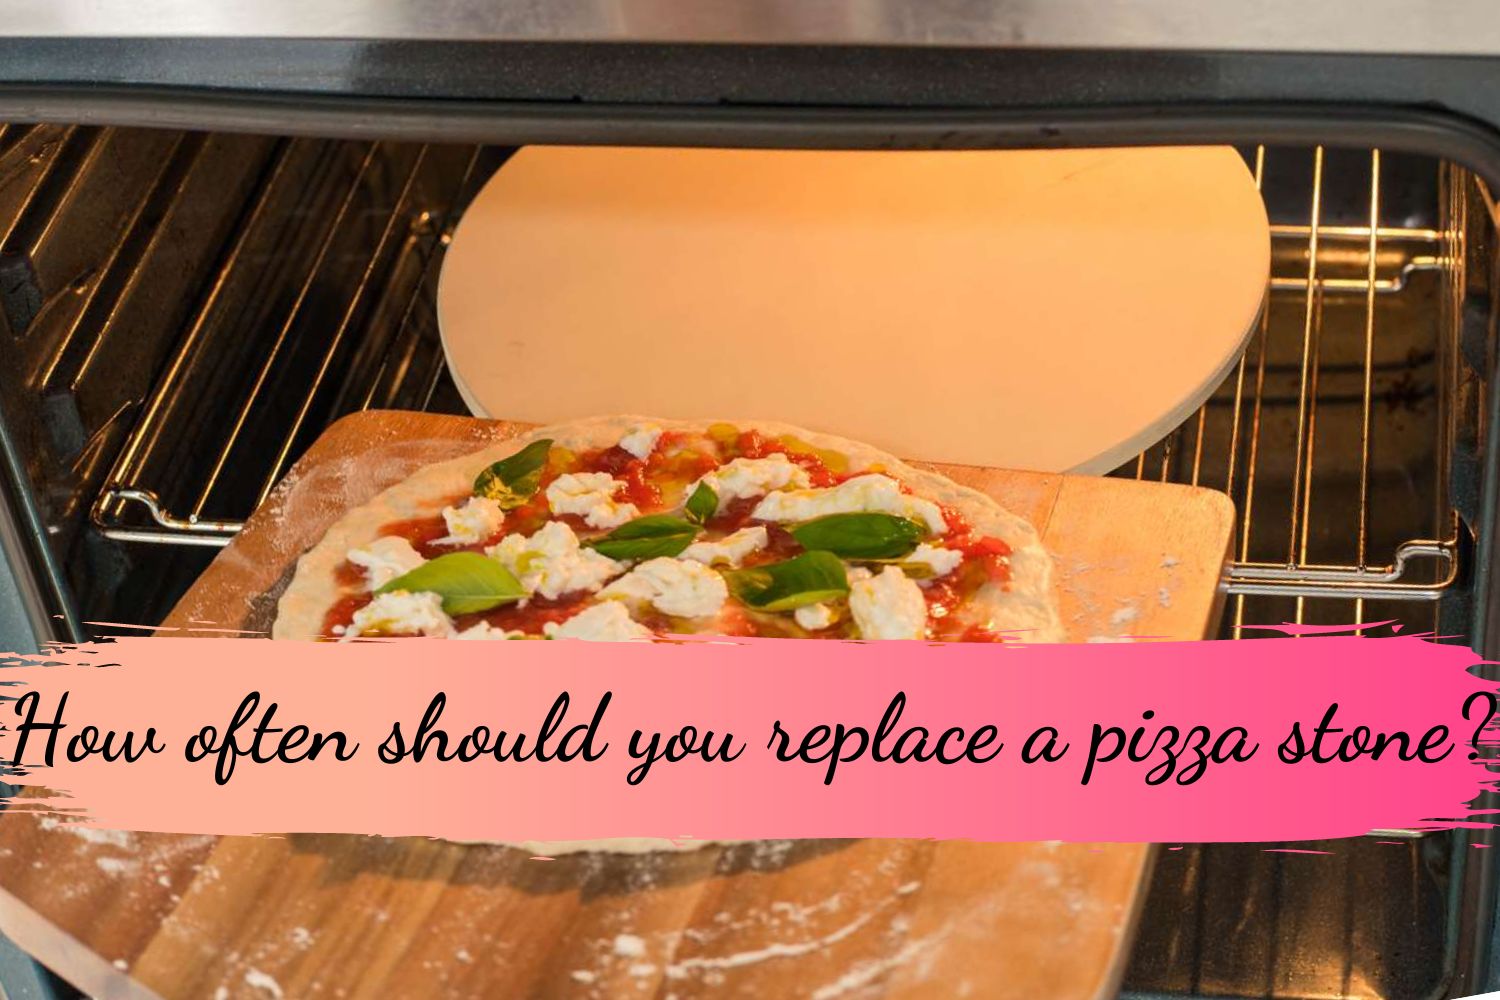 How often should you replace a pizza stone?